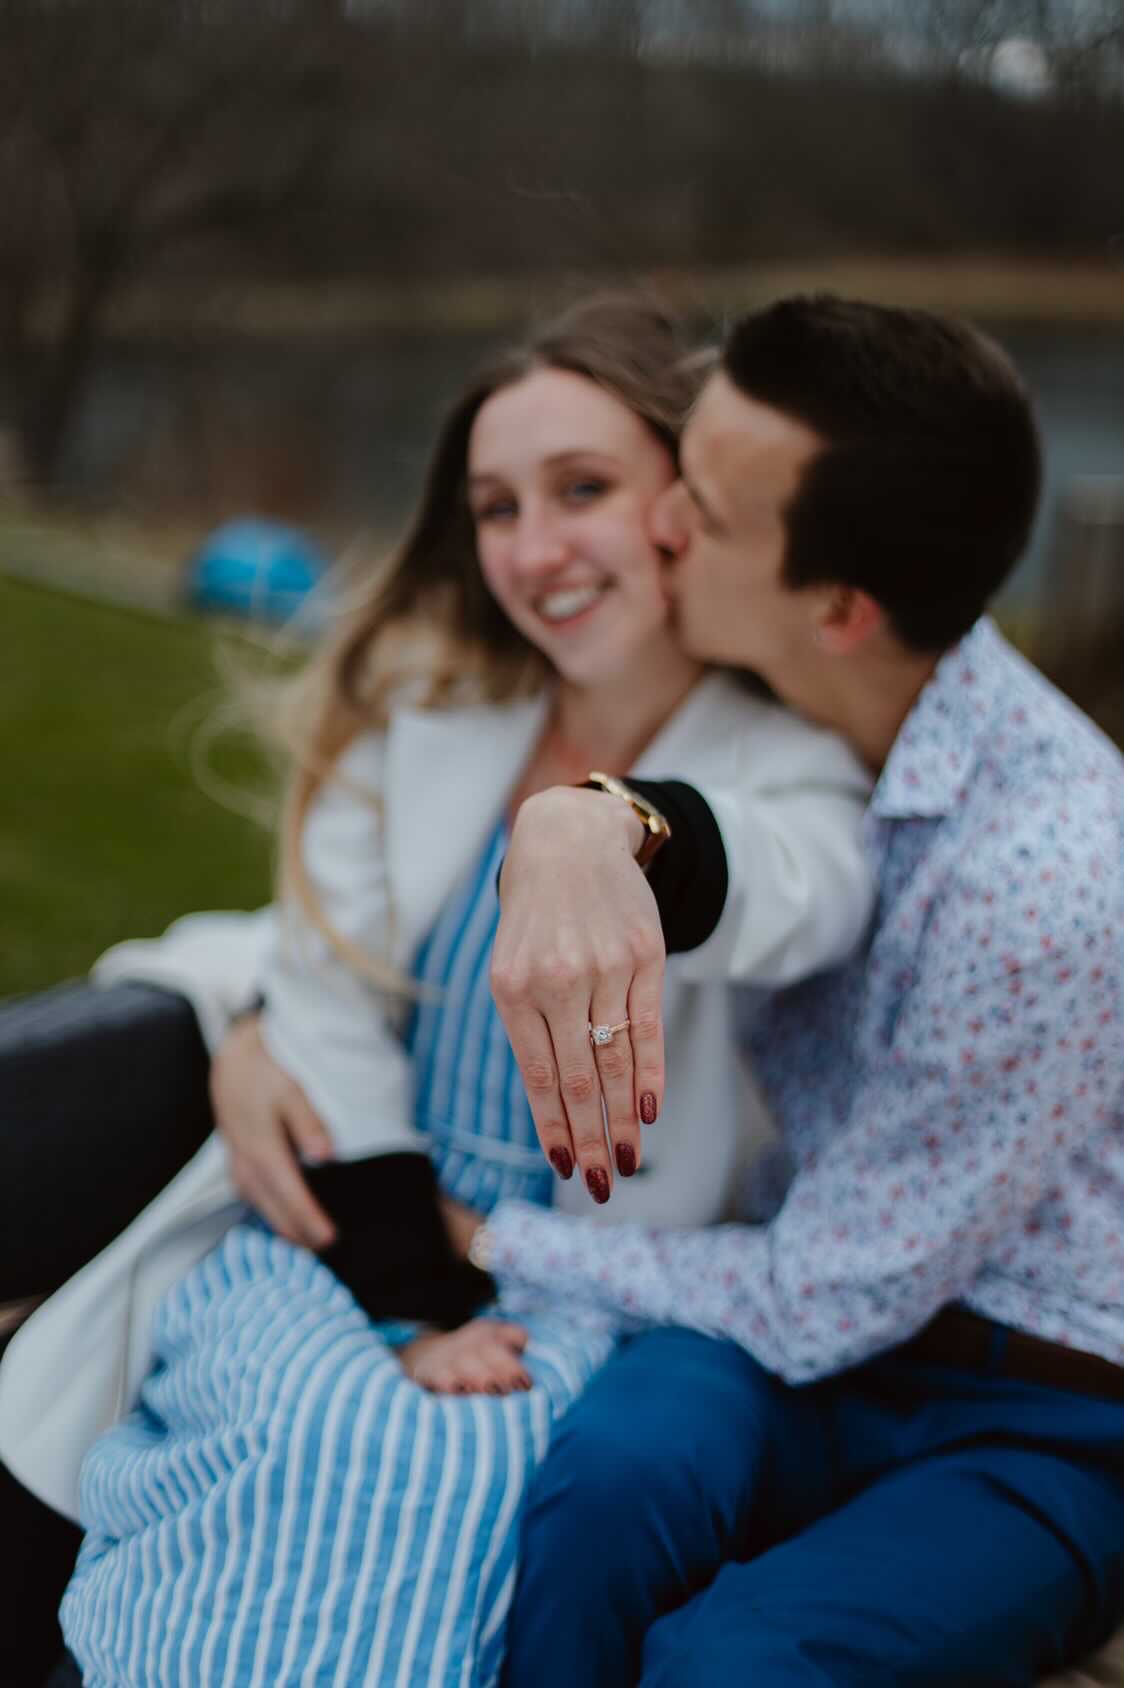 Lillie and Daniel sitting together to posing for a picture and Lillie showing his engagement ring.